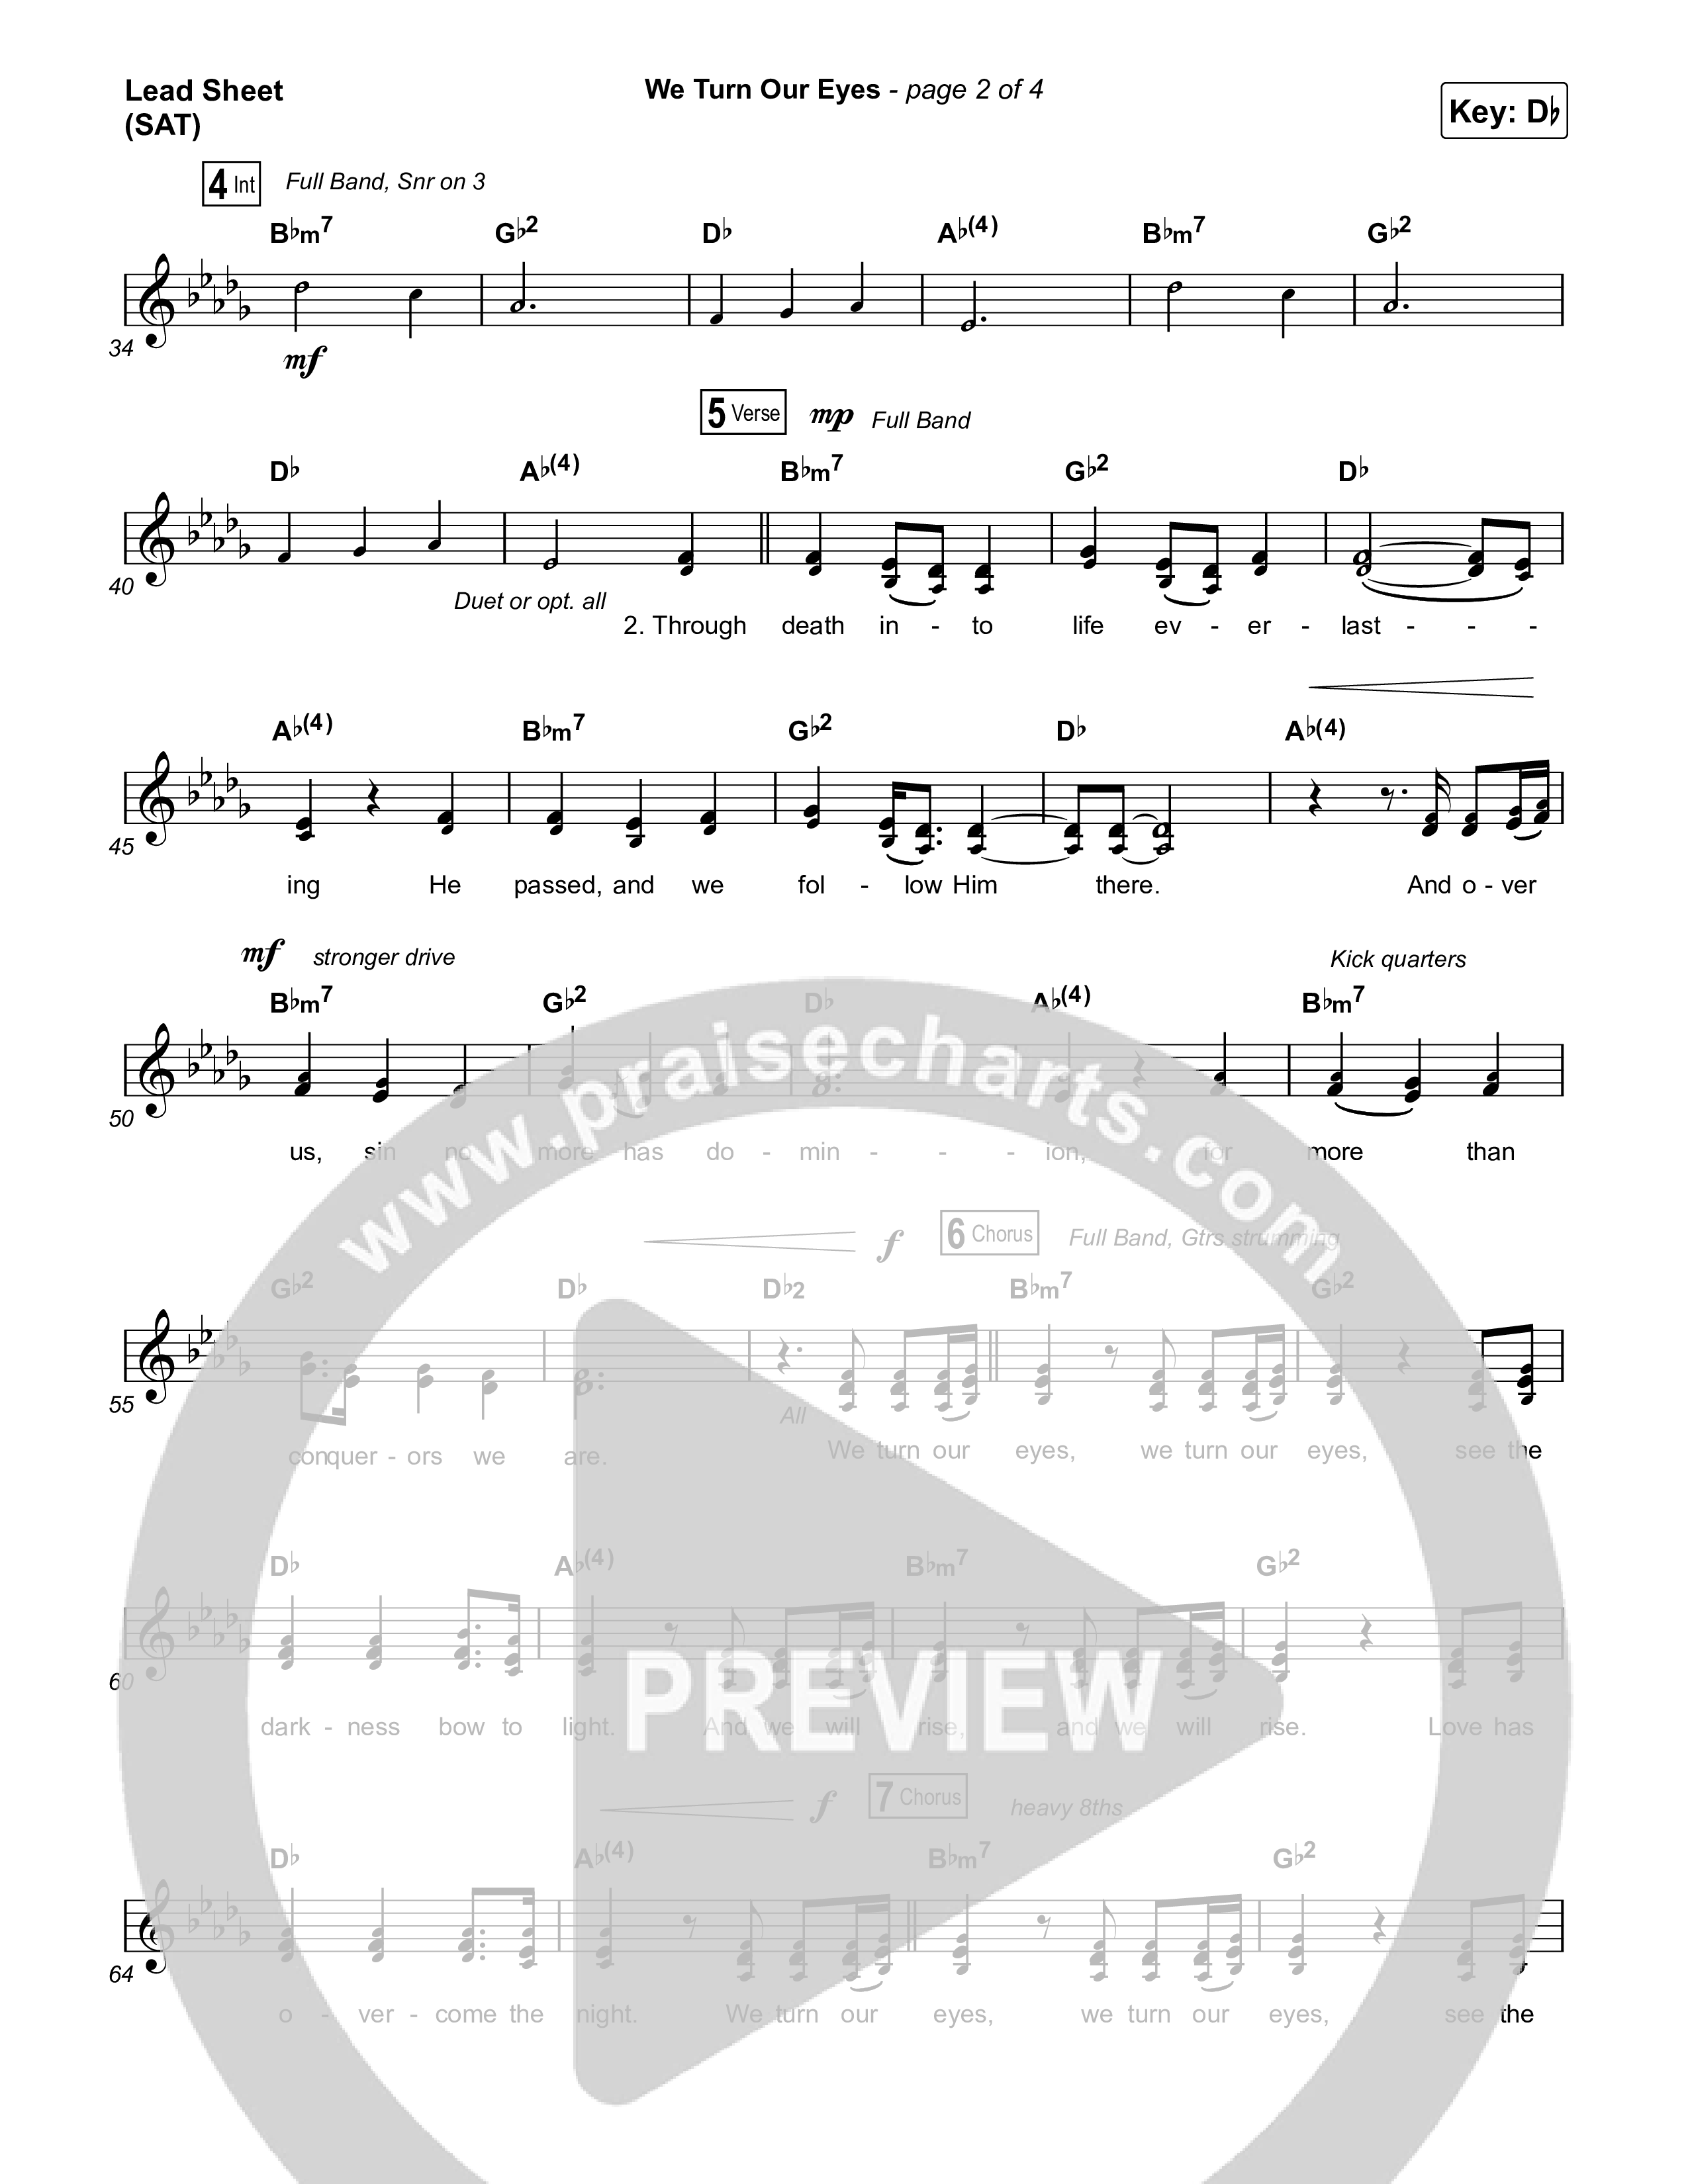 We Turn Our Eyes Lead Sheet (SAT) (Travis Cottrell)